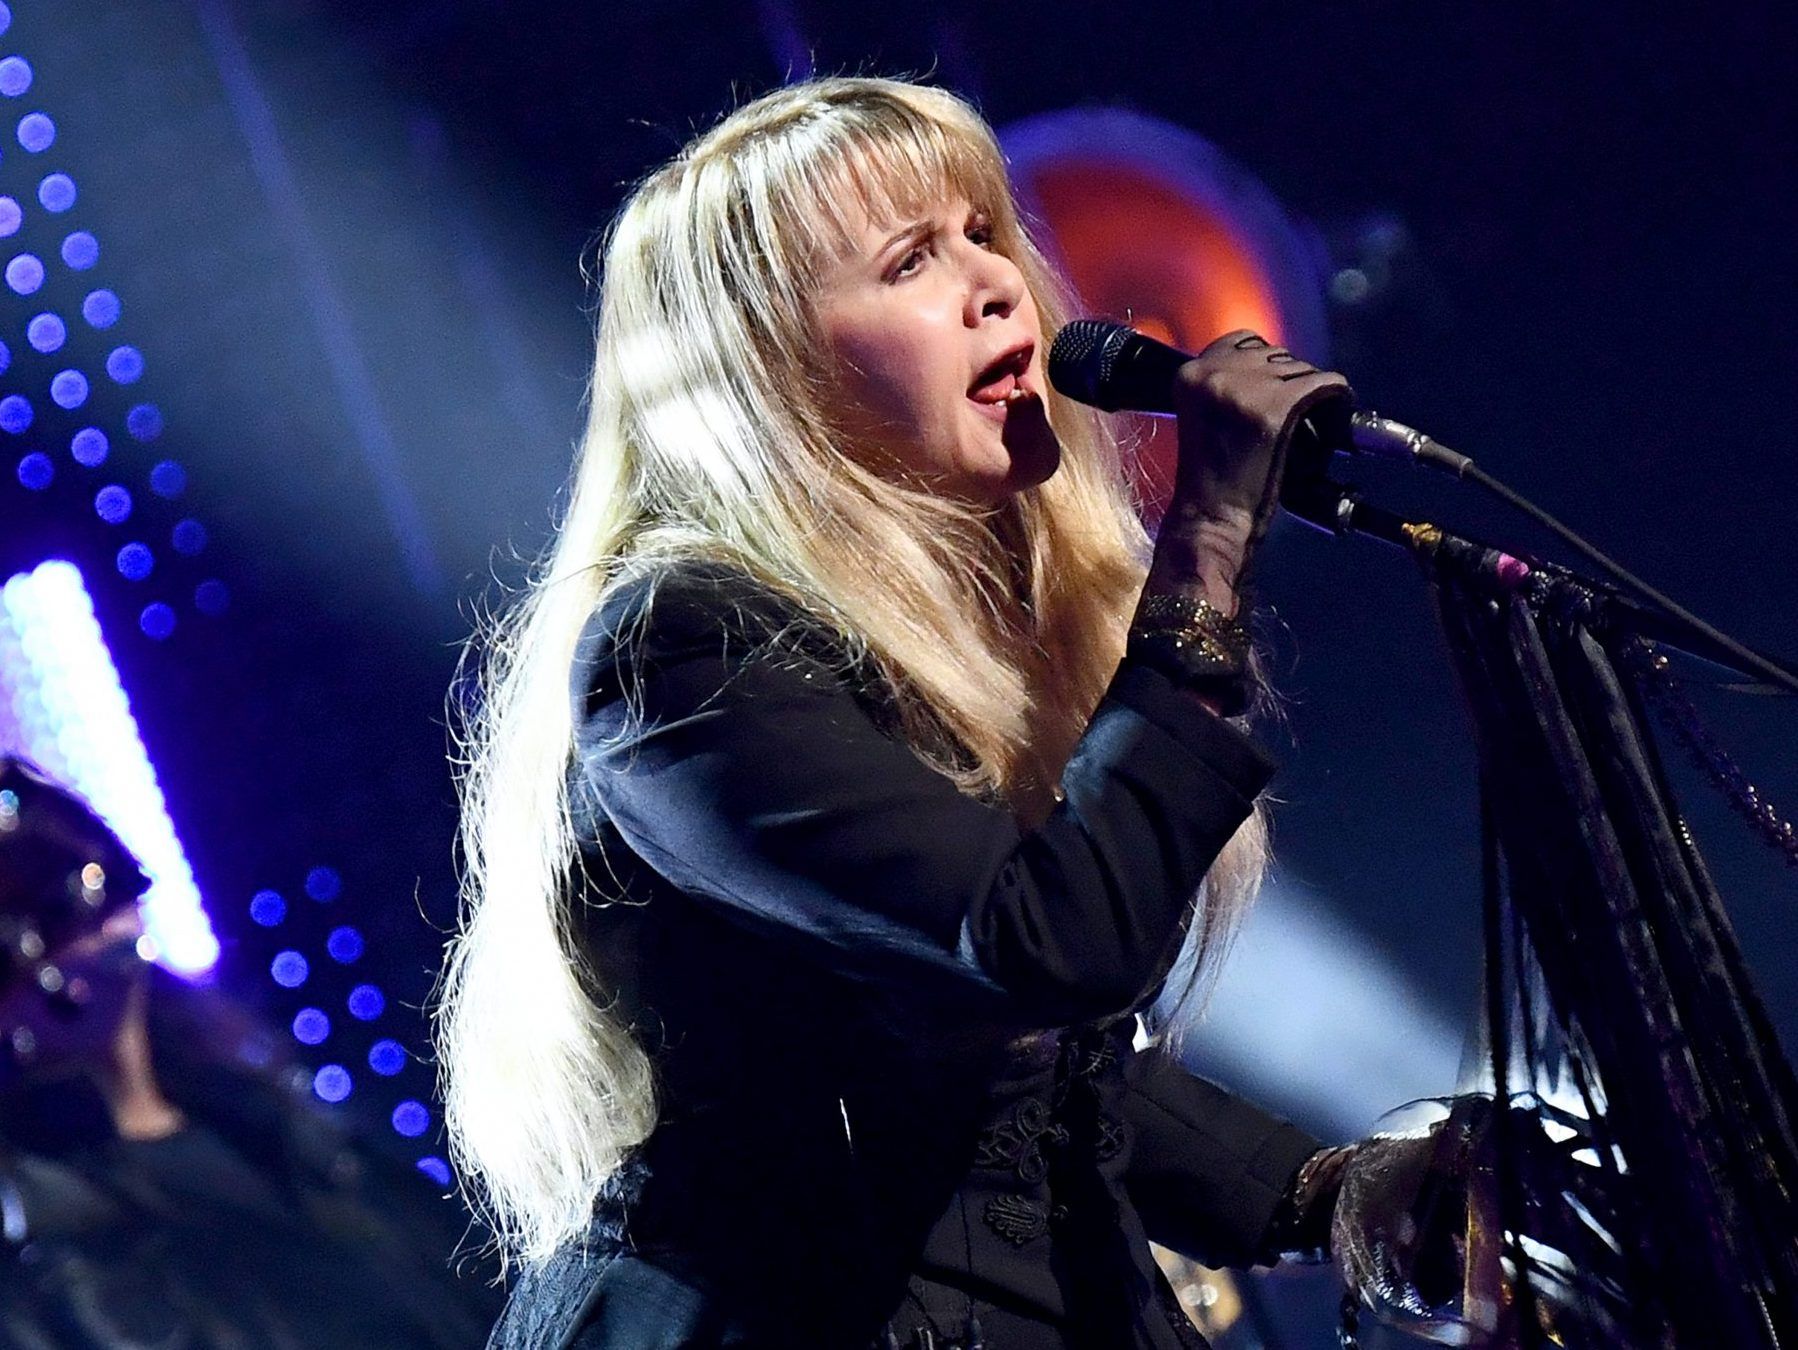 Stevie Nicks says Fleetwood Mac is finished after Christine McVie's death